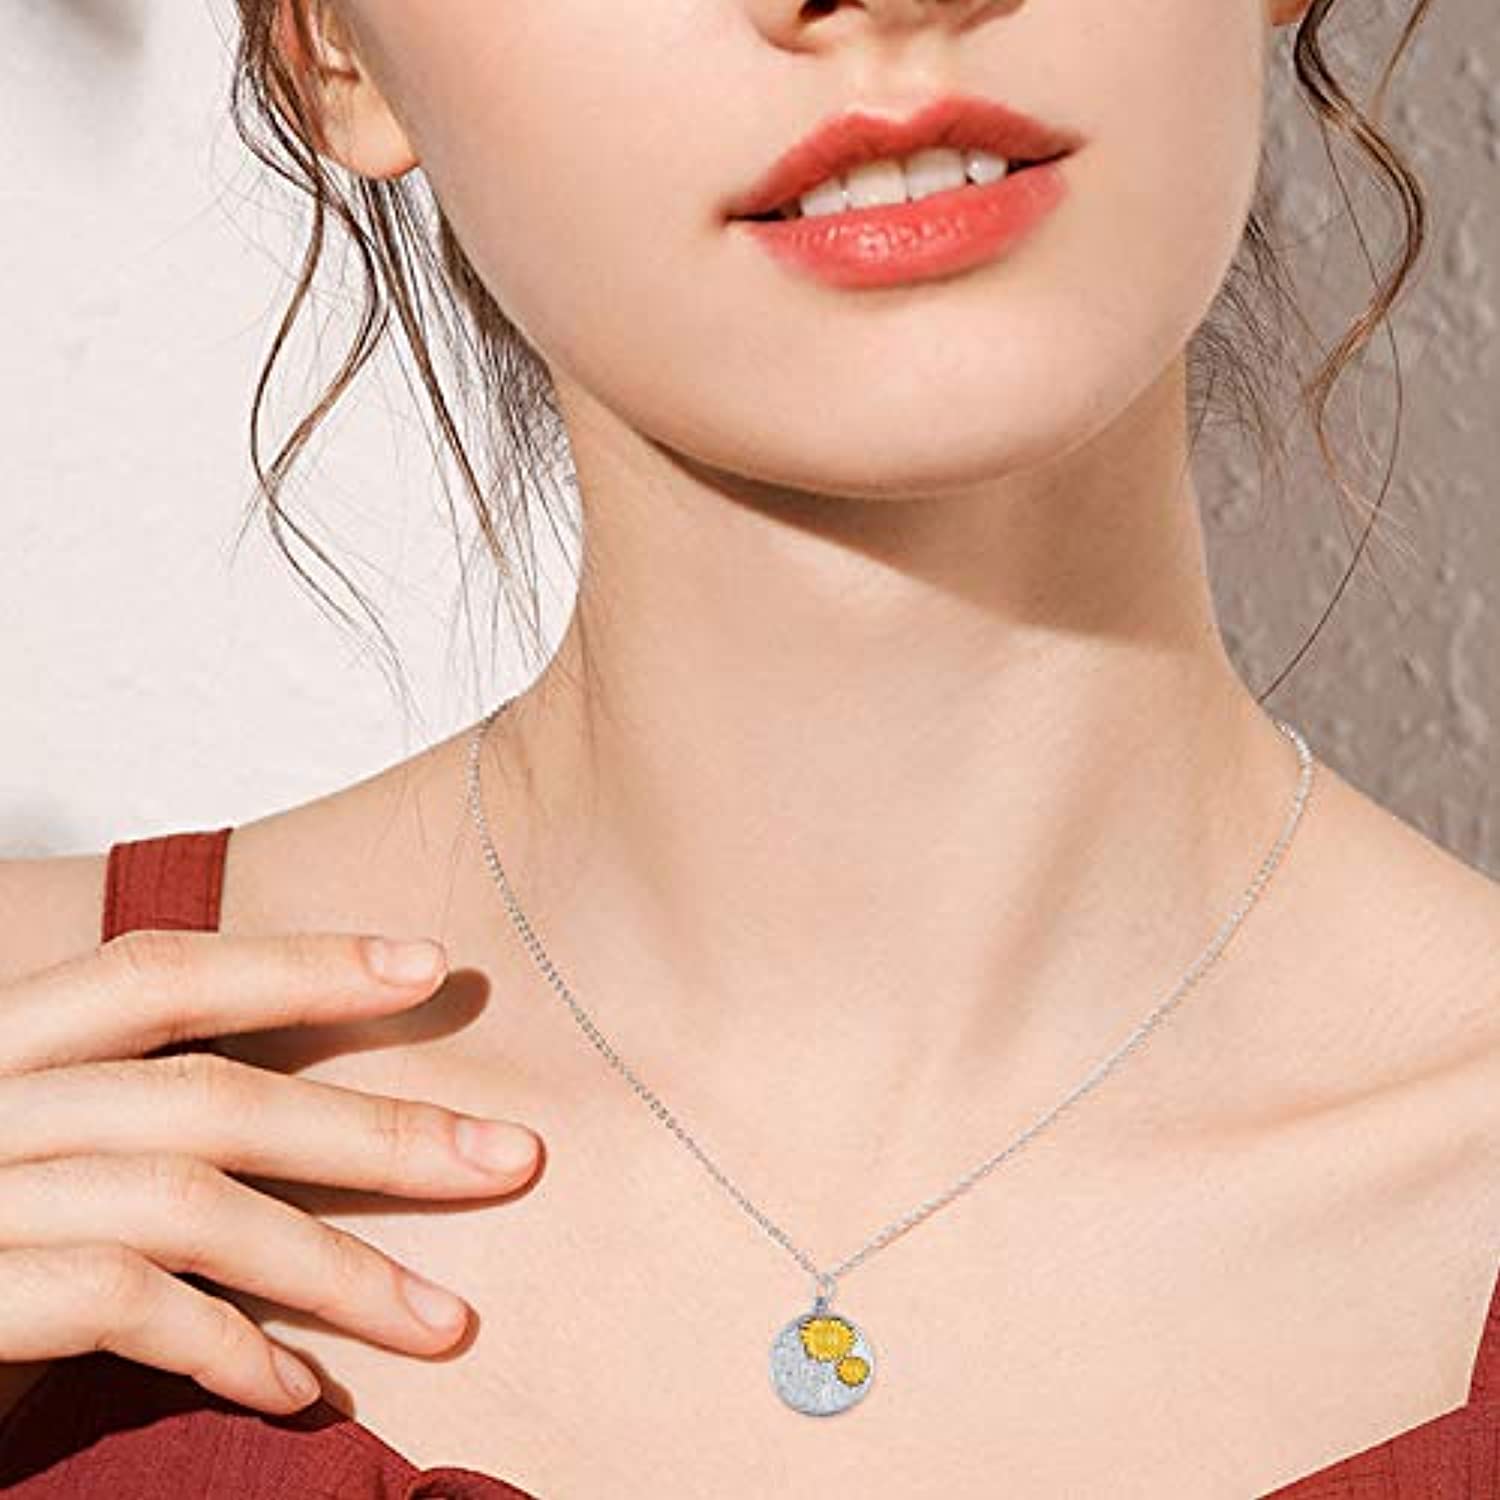 Sunflower Disc Necklace You Are My Sunshine S925 Sterling Silver 14K Gold Plated Wedding Jewelry for Women